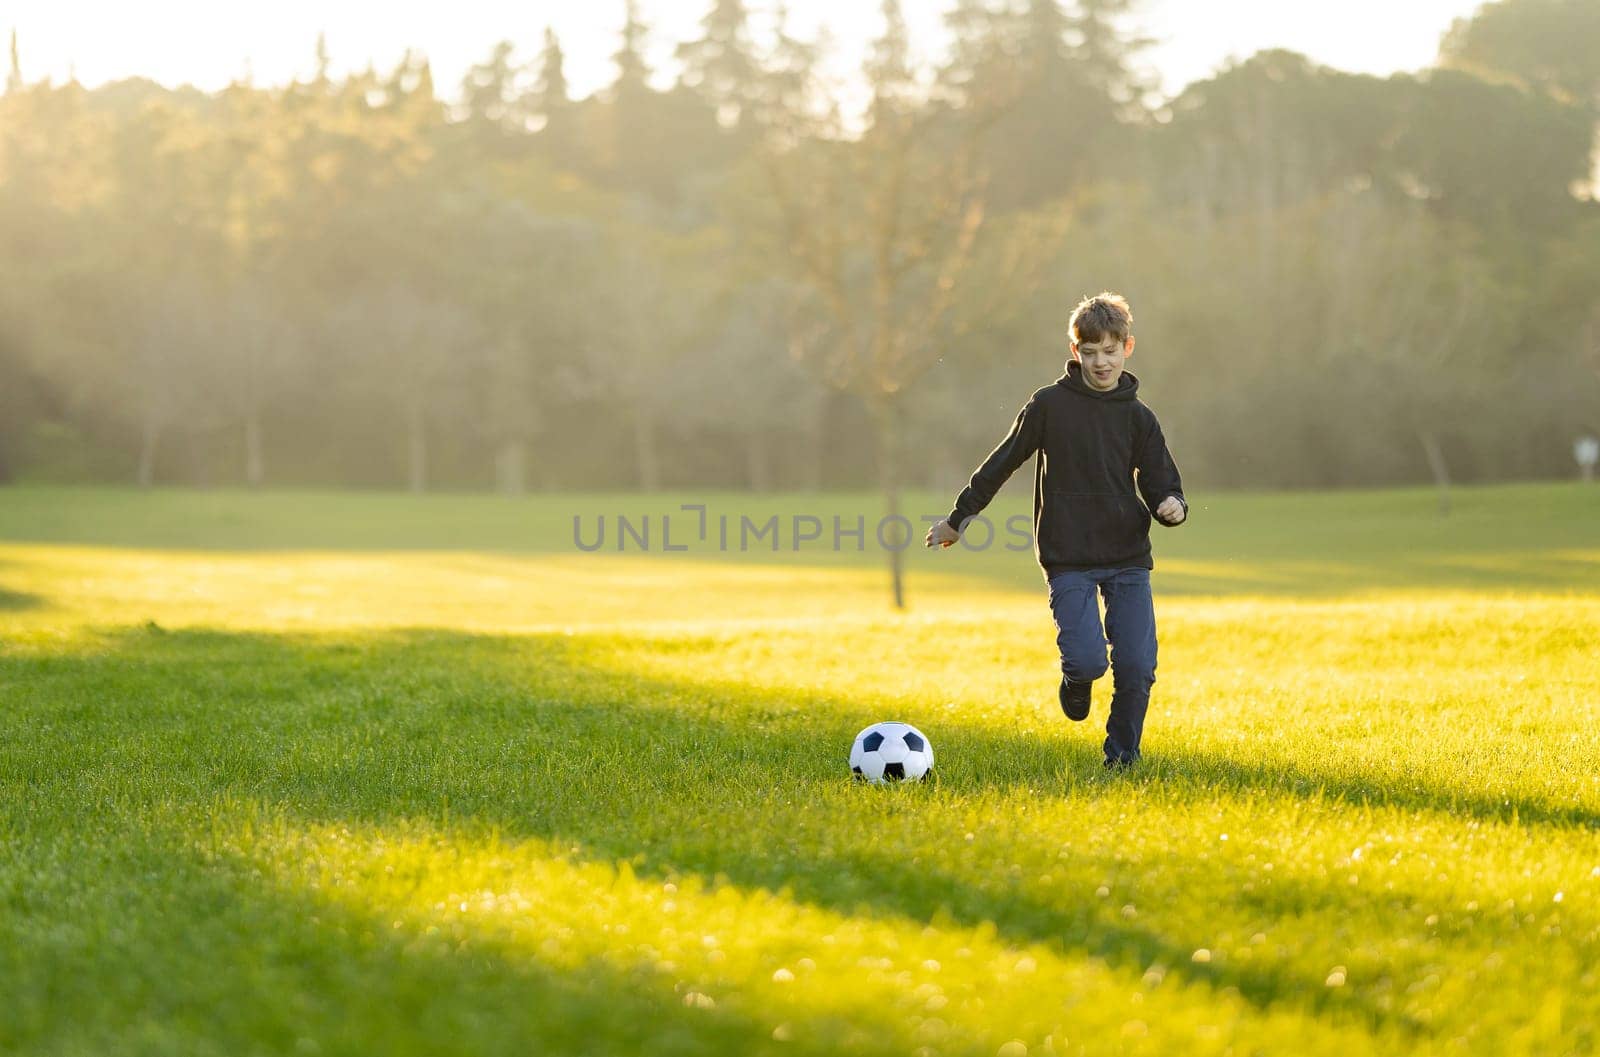 A boy is playing soccer in a field. The grass is green and the sky is blue. The boy is wearing a black jacket and blue jeans